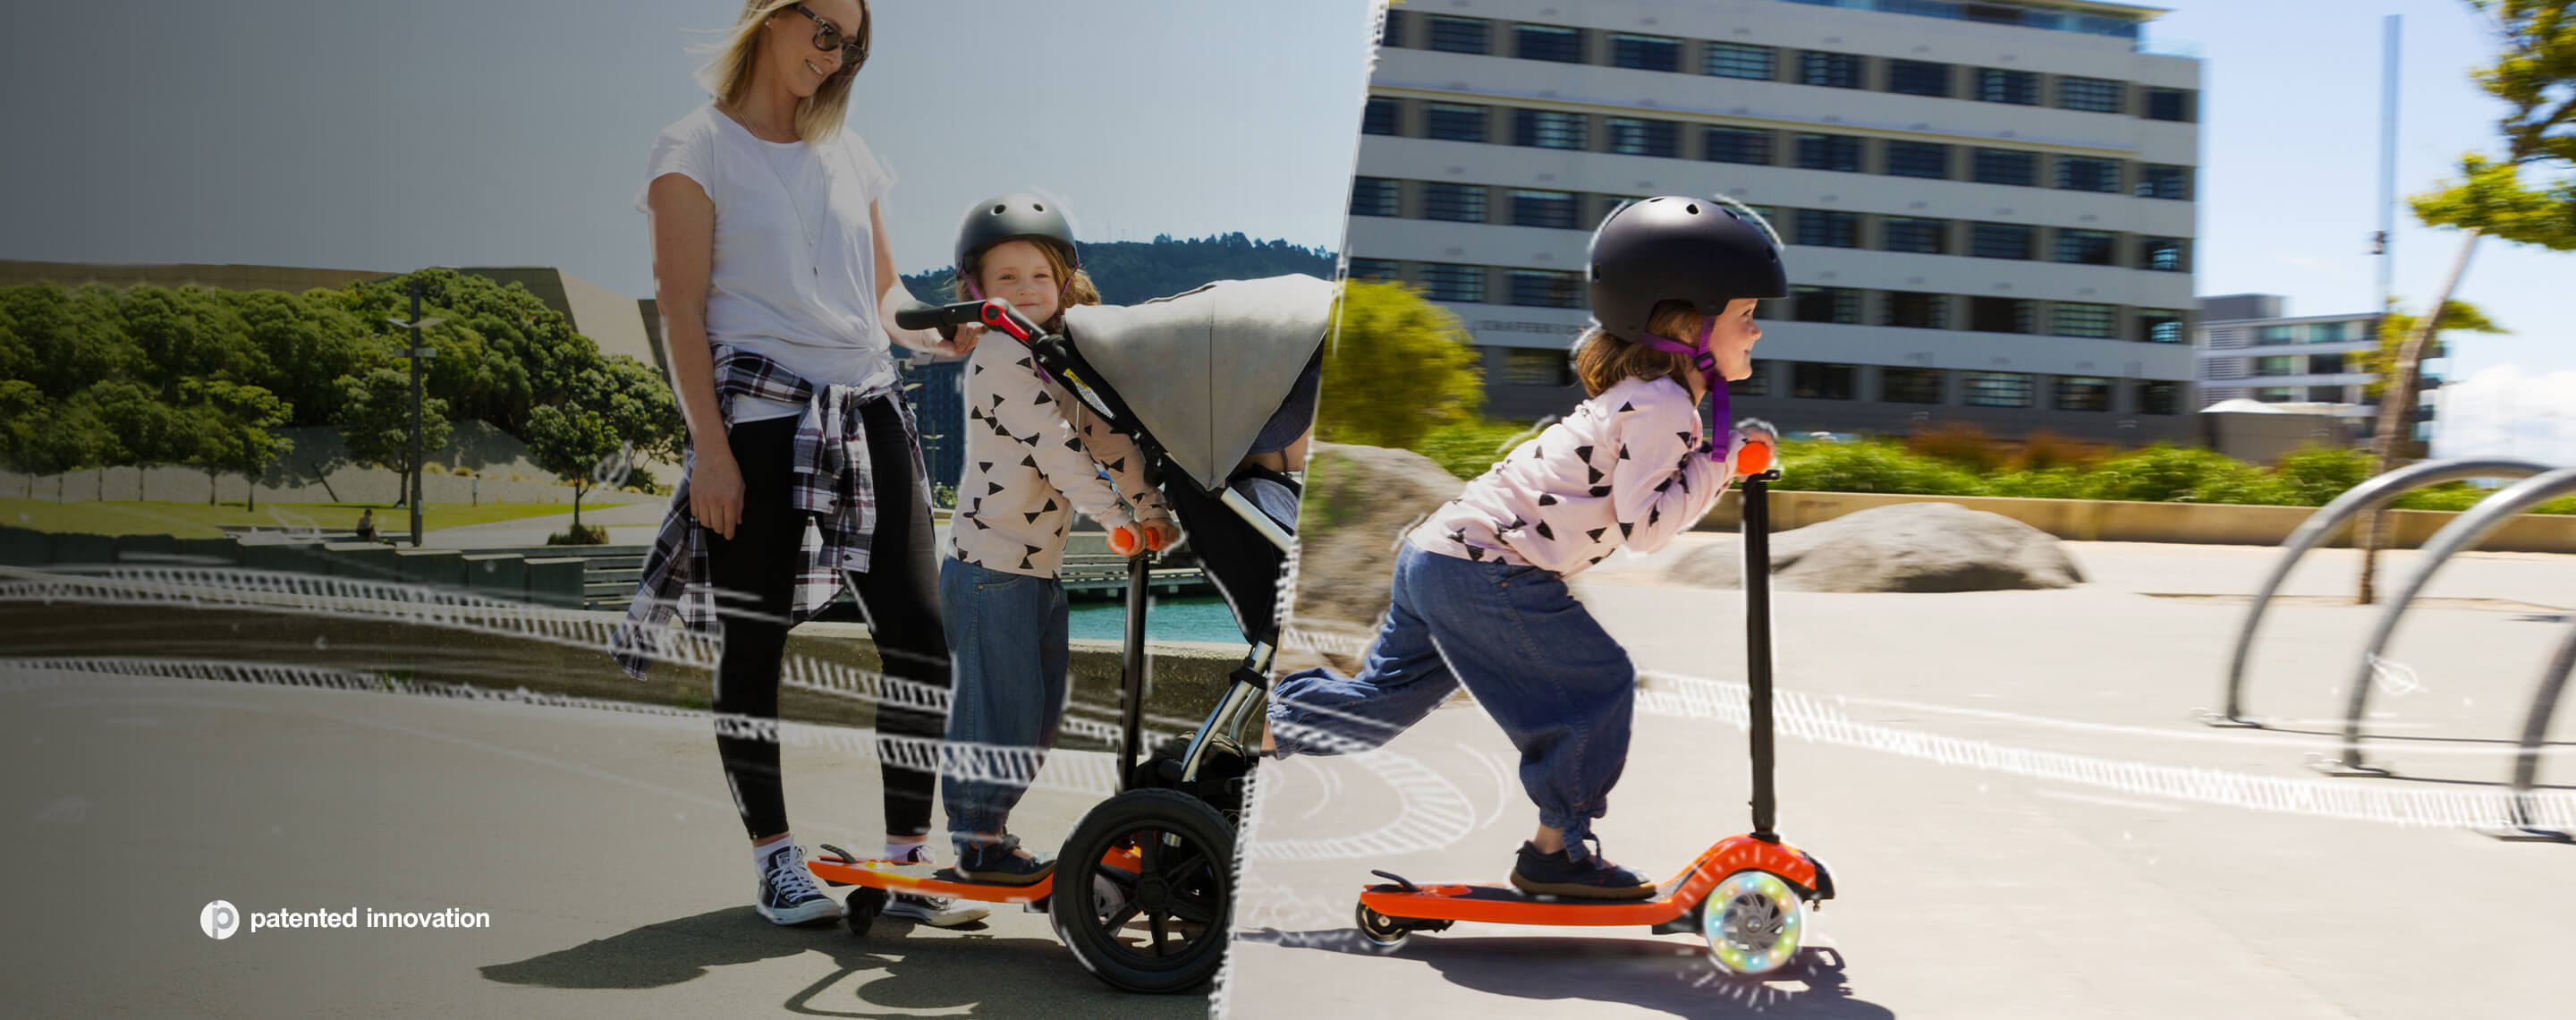 Kid riding scooter board at park using safety helmet - Mountain Buggy freerider™ buggy board attached to rear of pram.